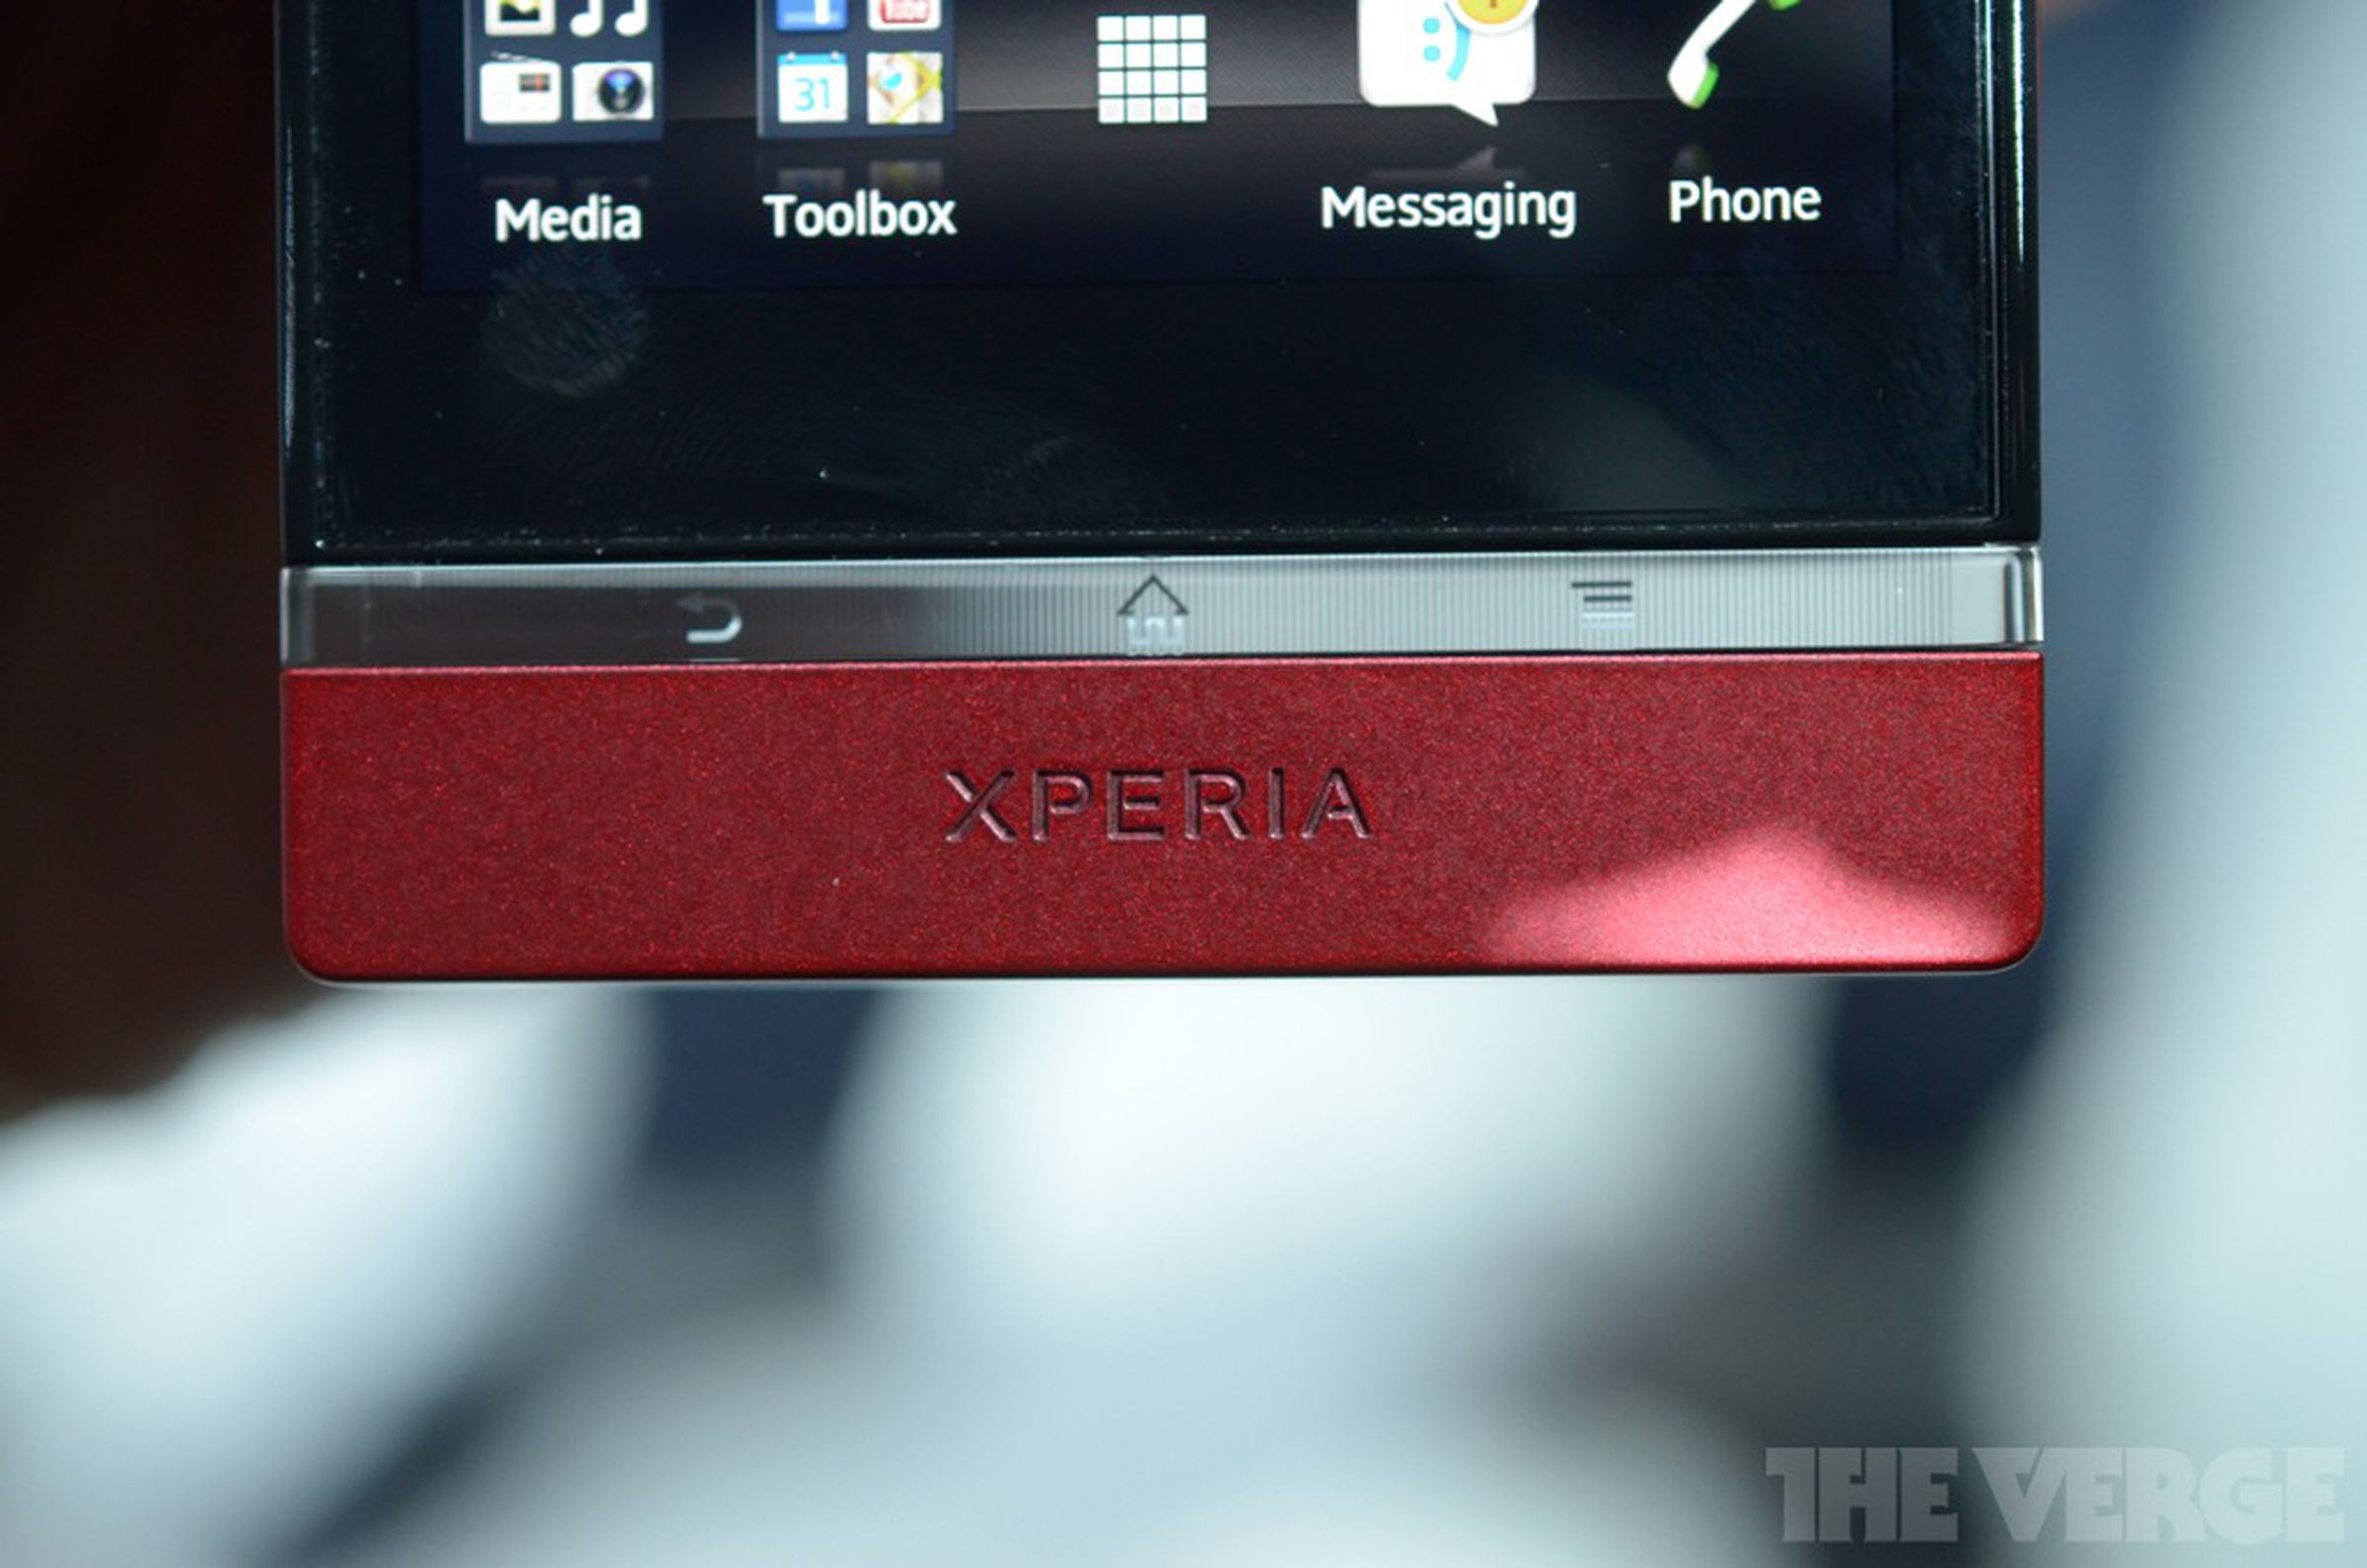 Sony Xperia P first hands-on!